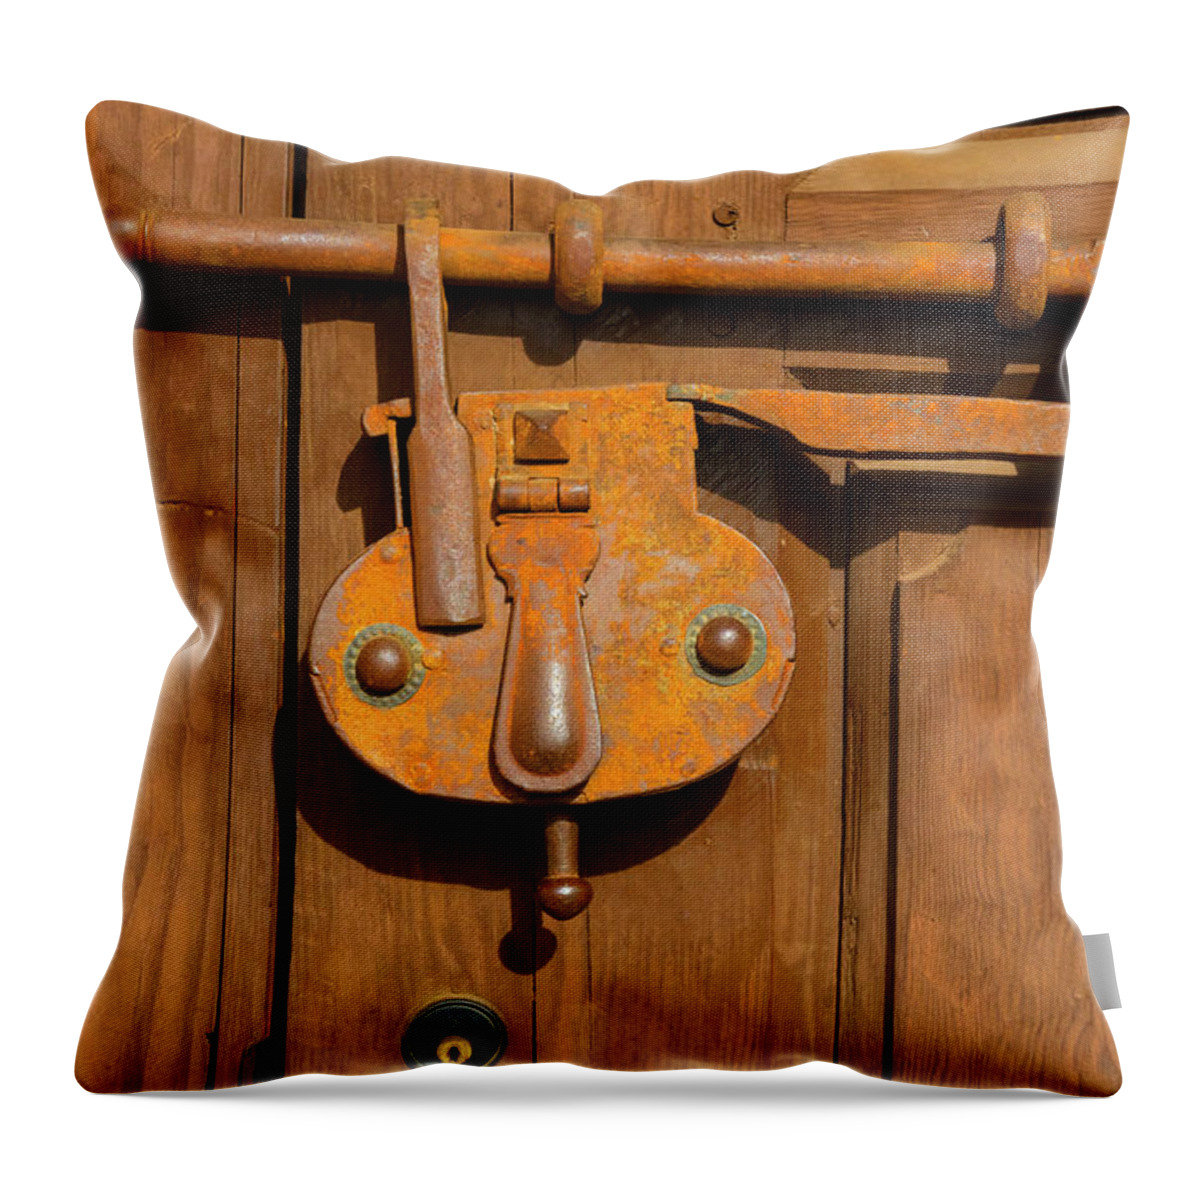 Photography Throw Pillow featuring the photograph Close-up Of An Old Lock, Santa Fe, New by Panoramic Images